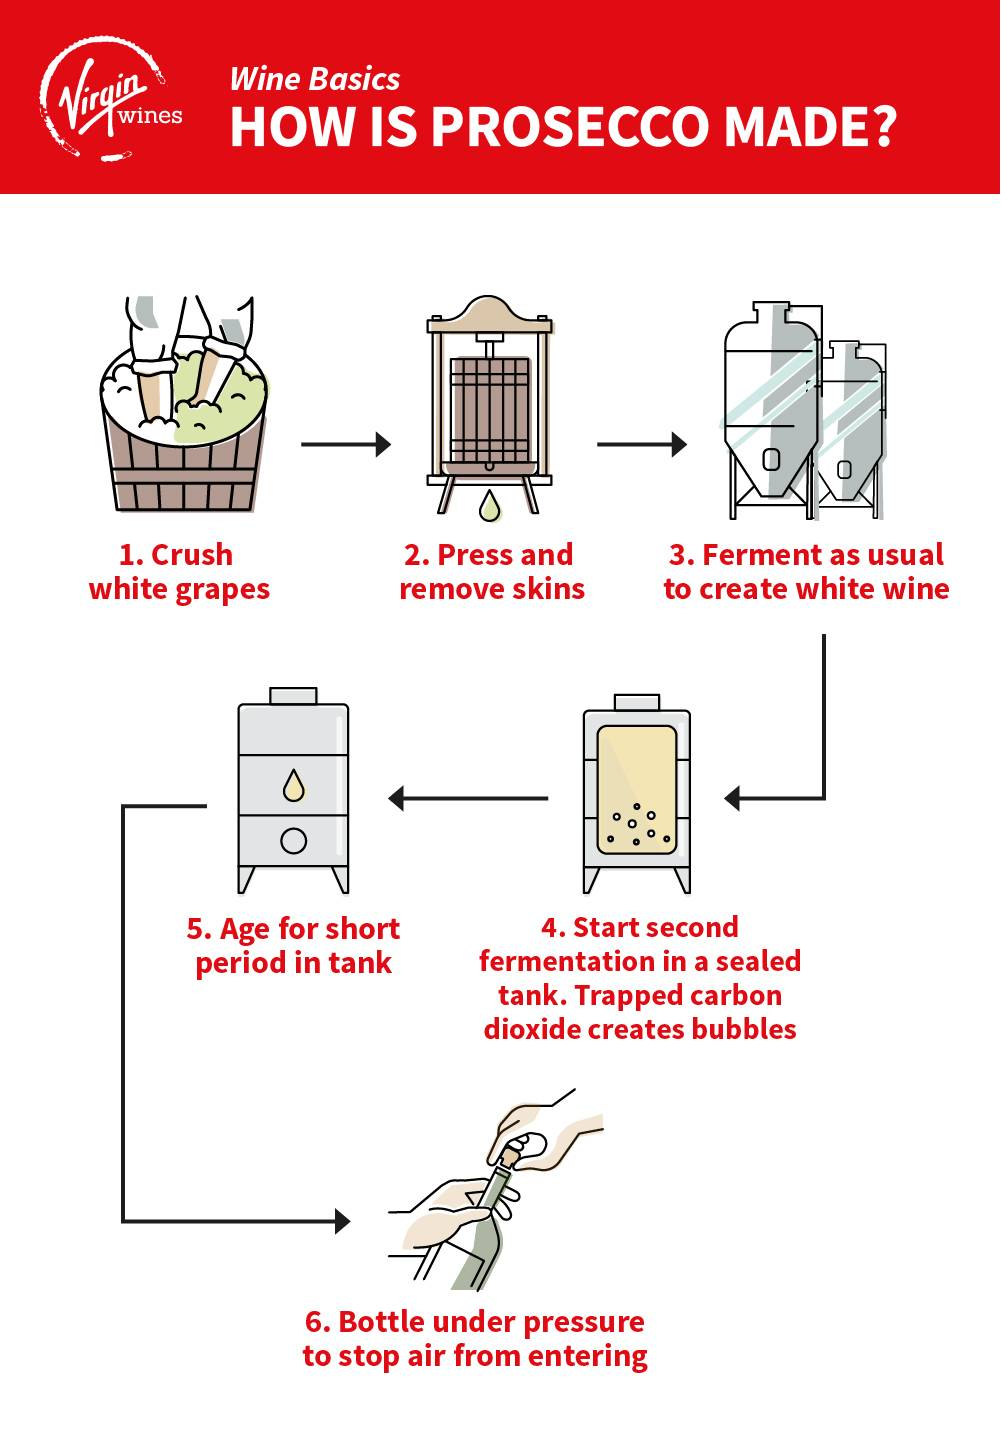 Infographic by Virgin Wines showing how Prosecco is made